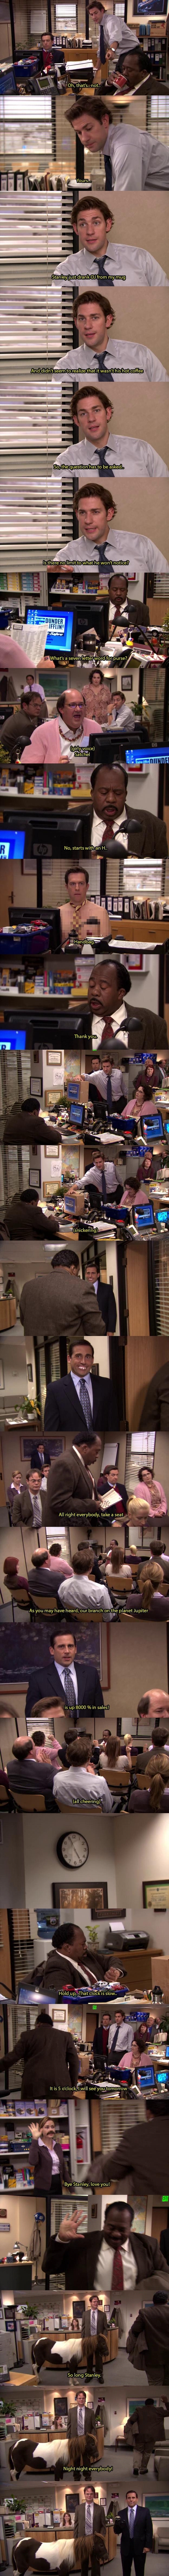 My favourite moment from The Office